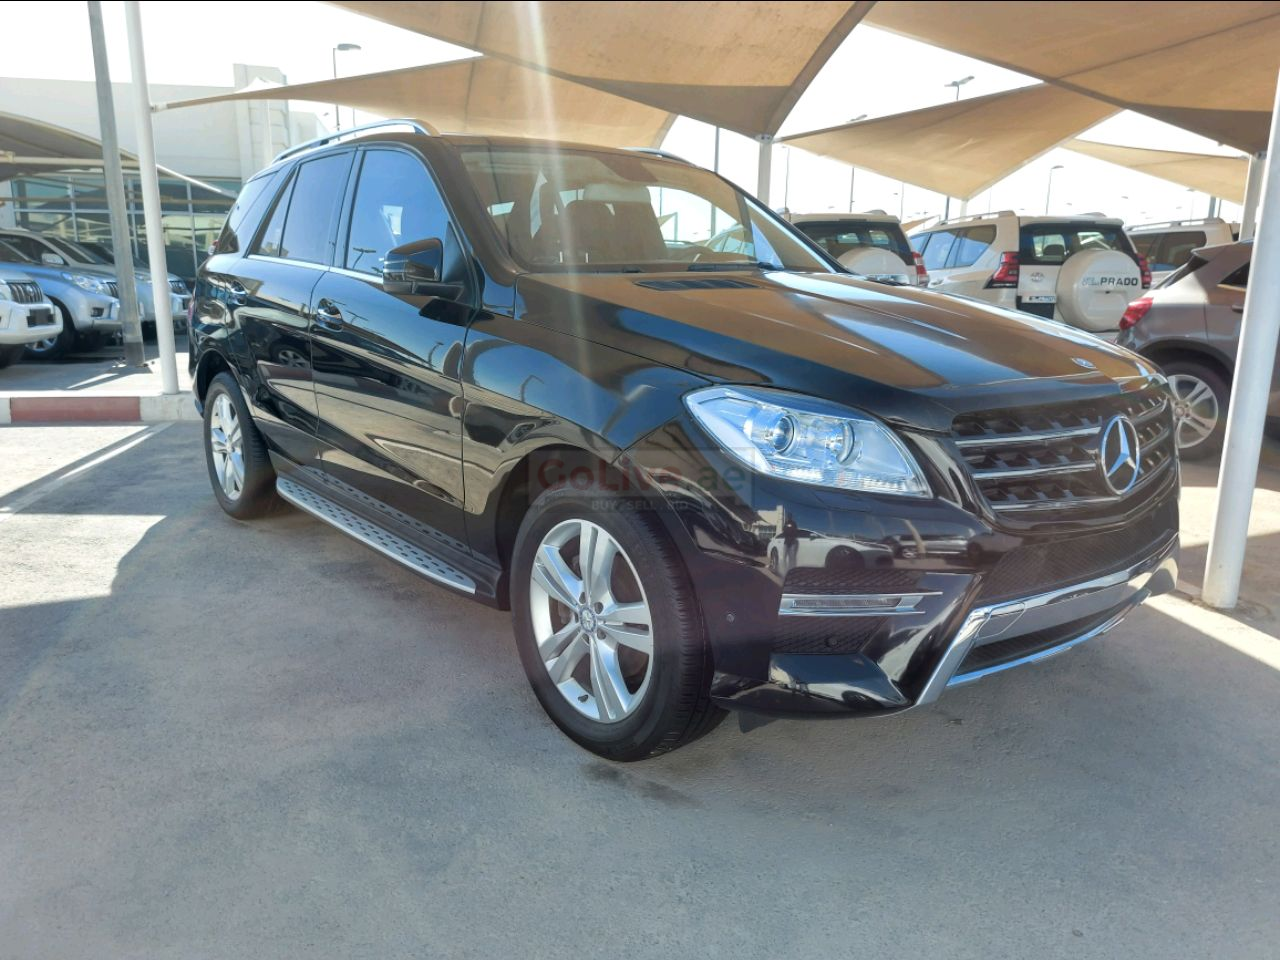 Mercedes Benz ML 2013 AED 60,000, Full Option, Fog Lights, Negotiable